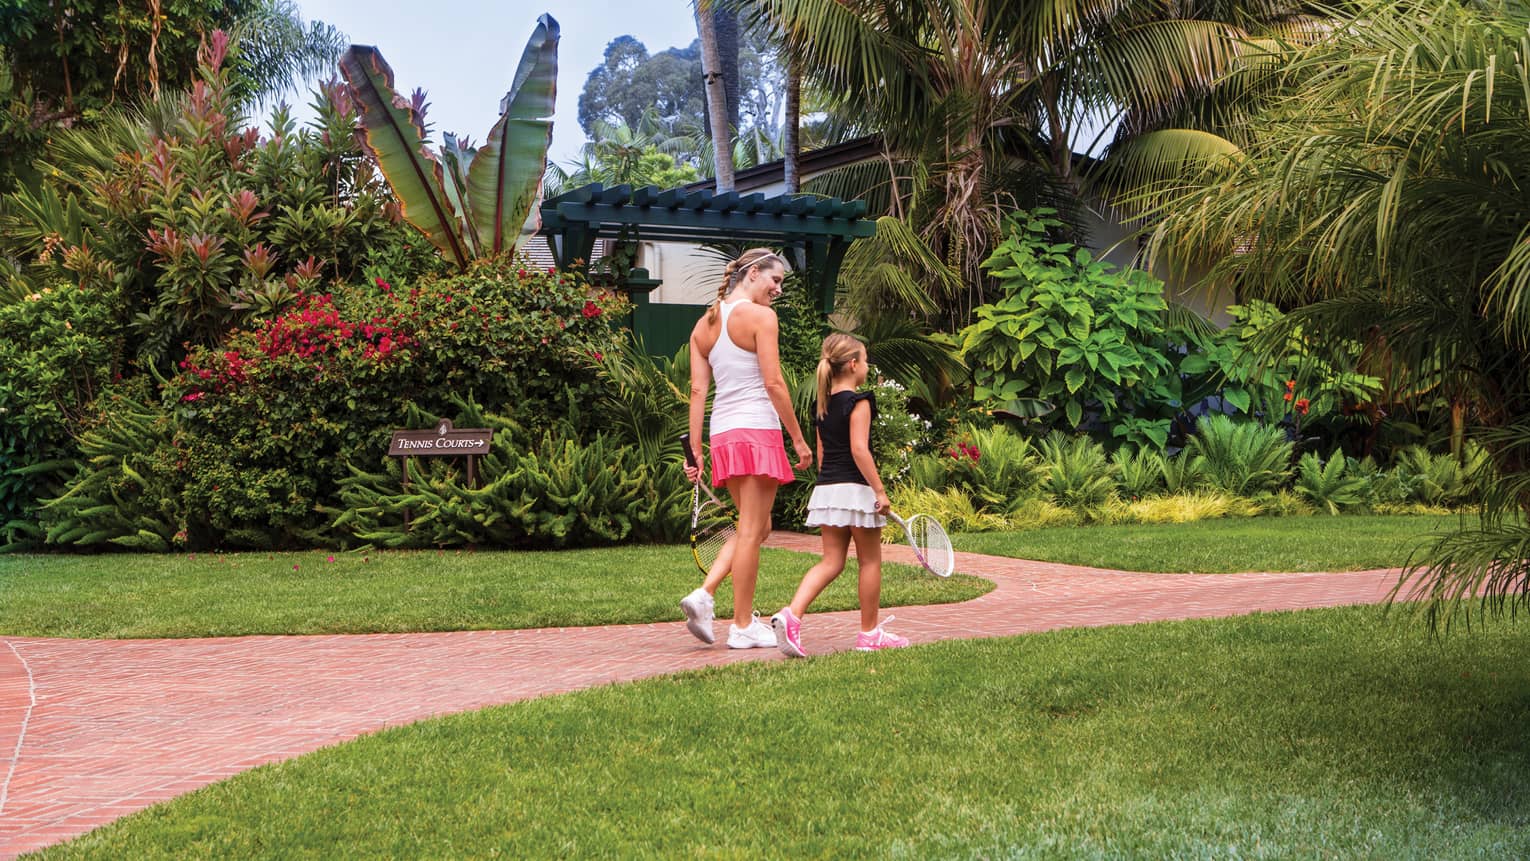 Woman and young girl holding tennis rackets walk down brick path, tropical garden